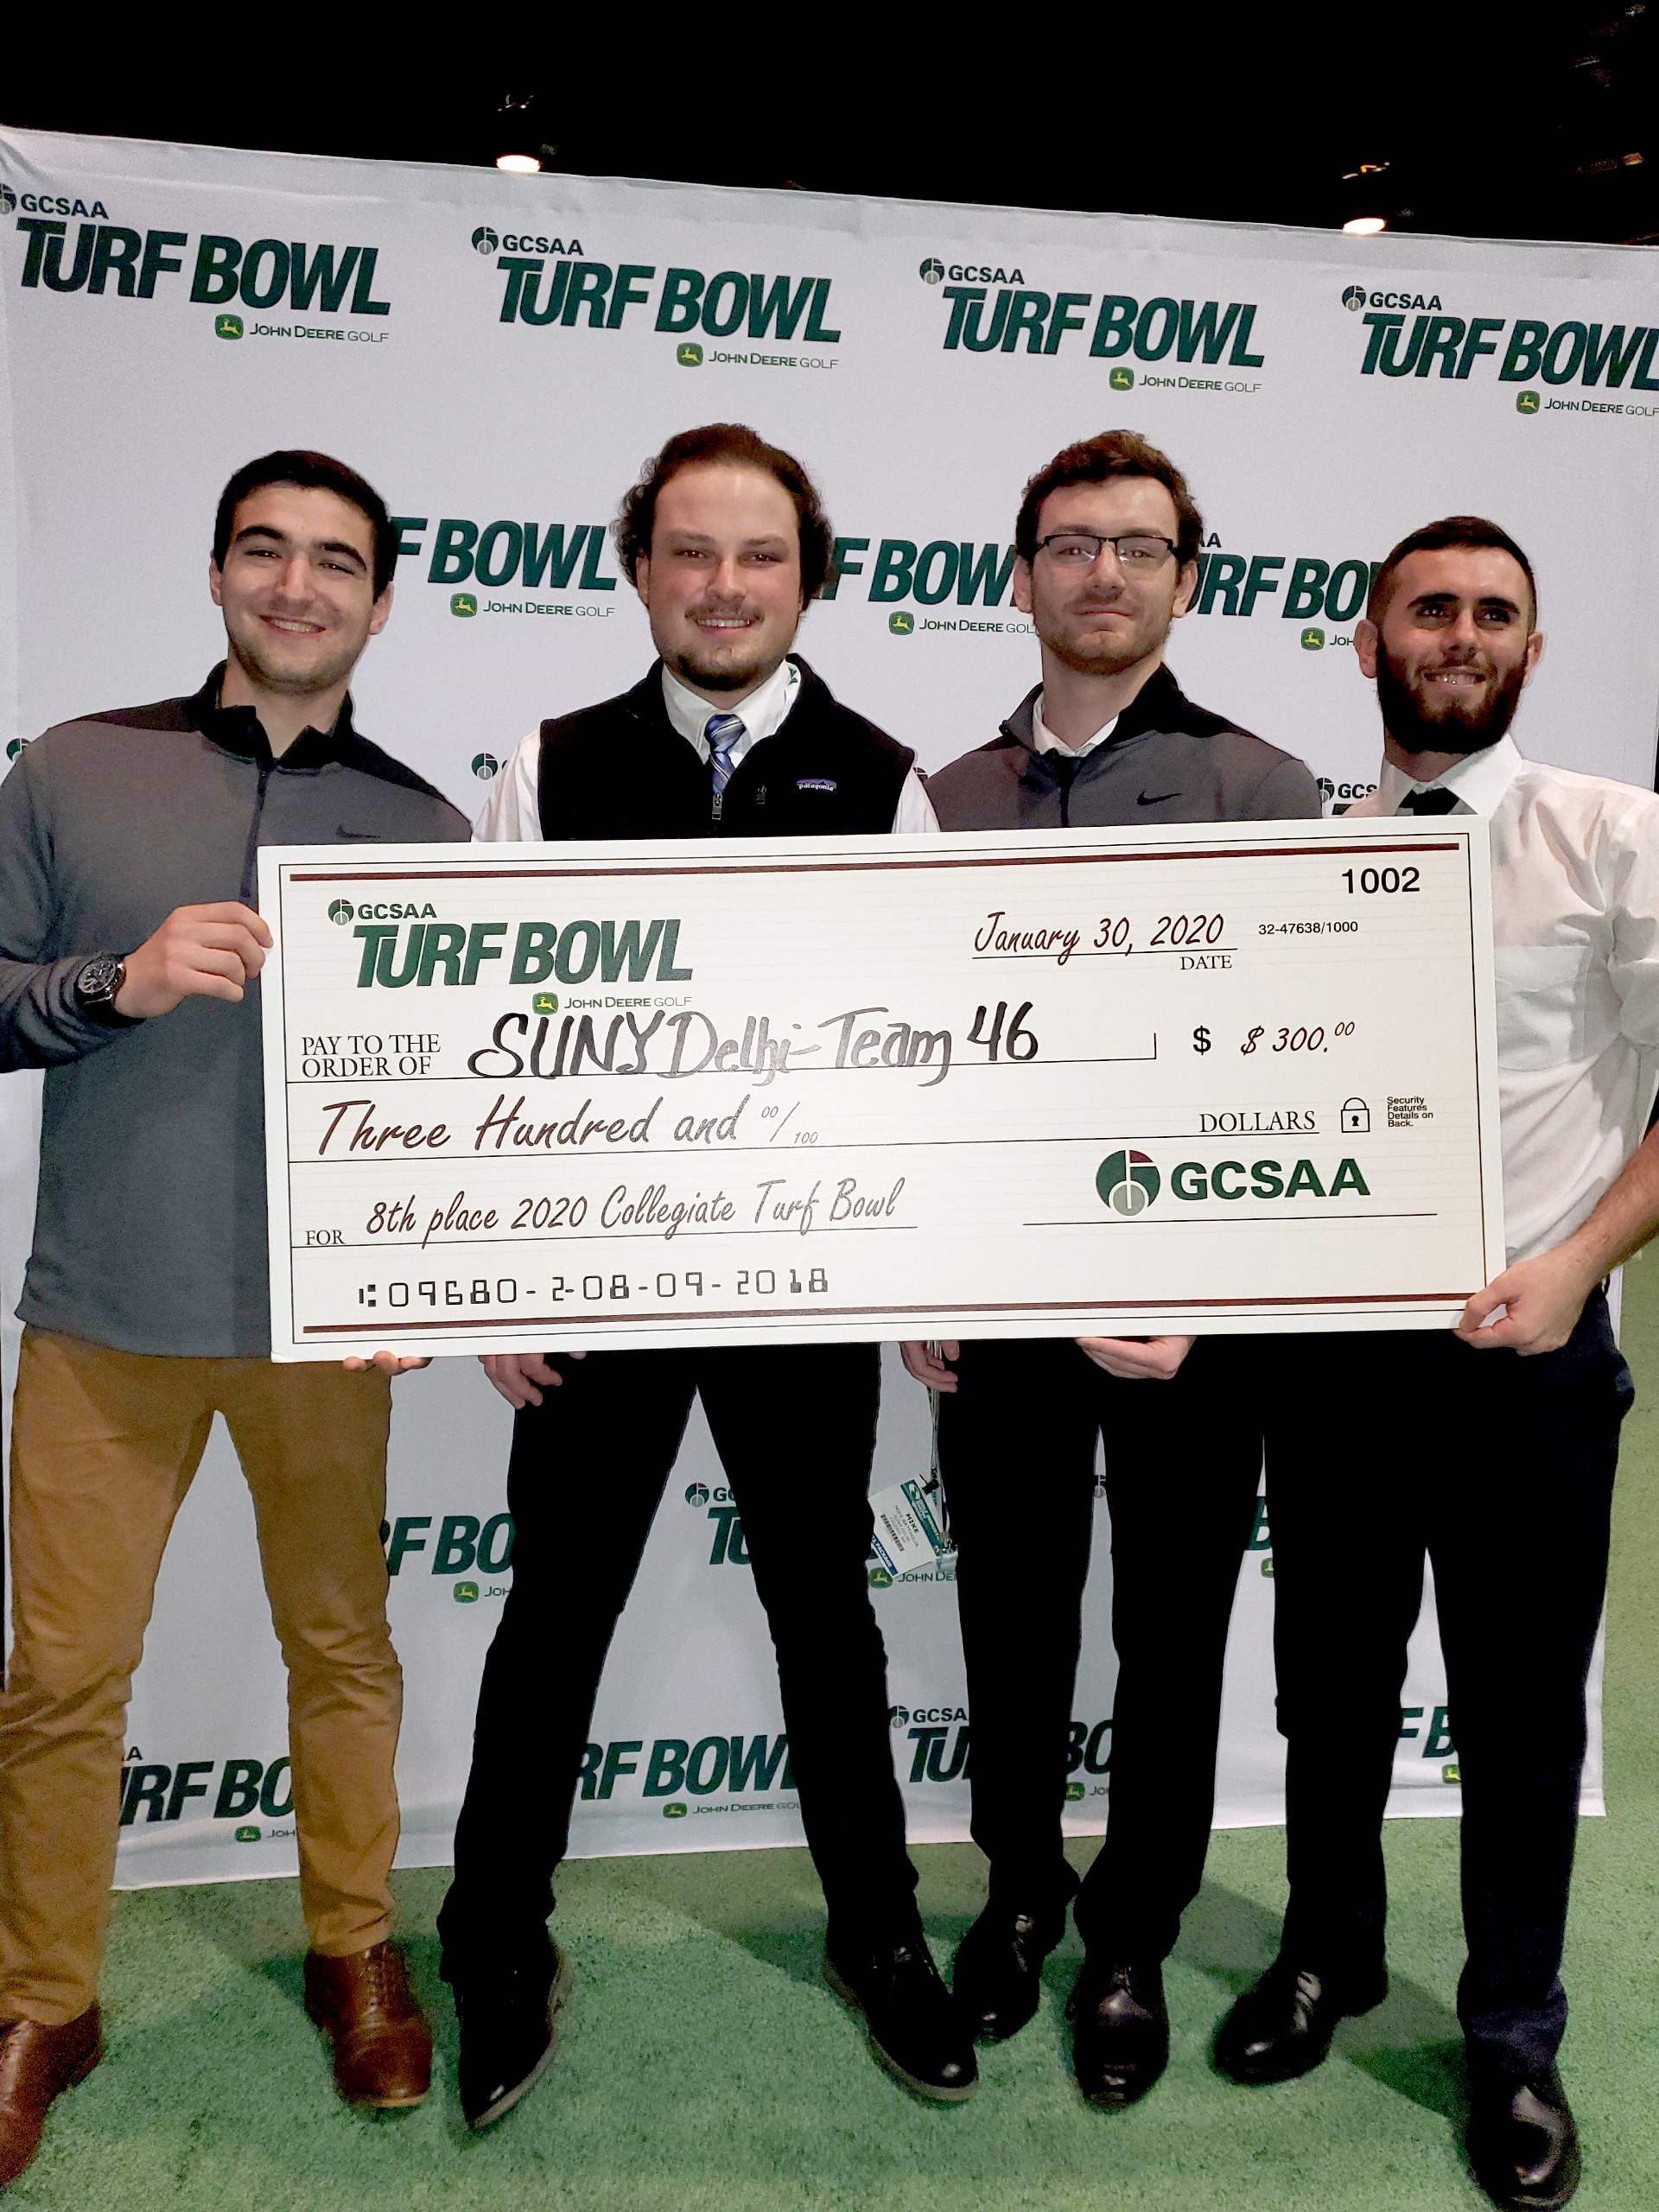 Students holding an oversized check